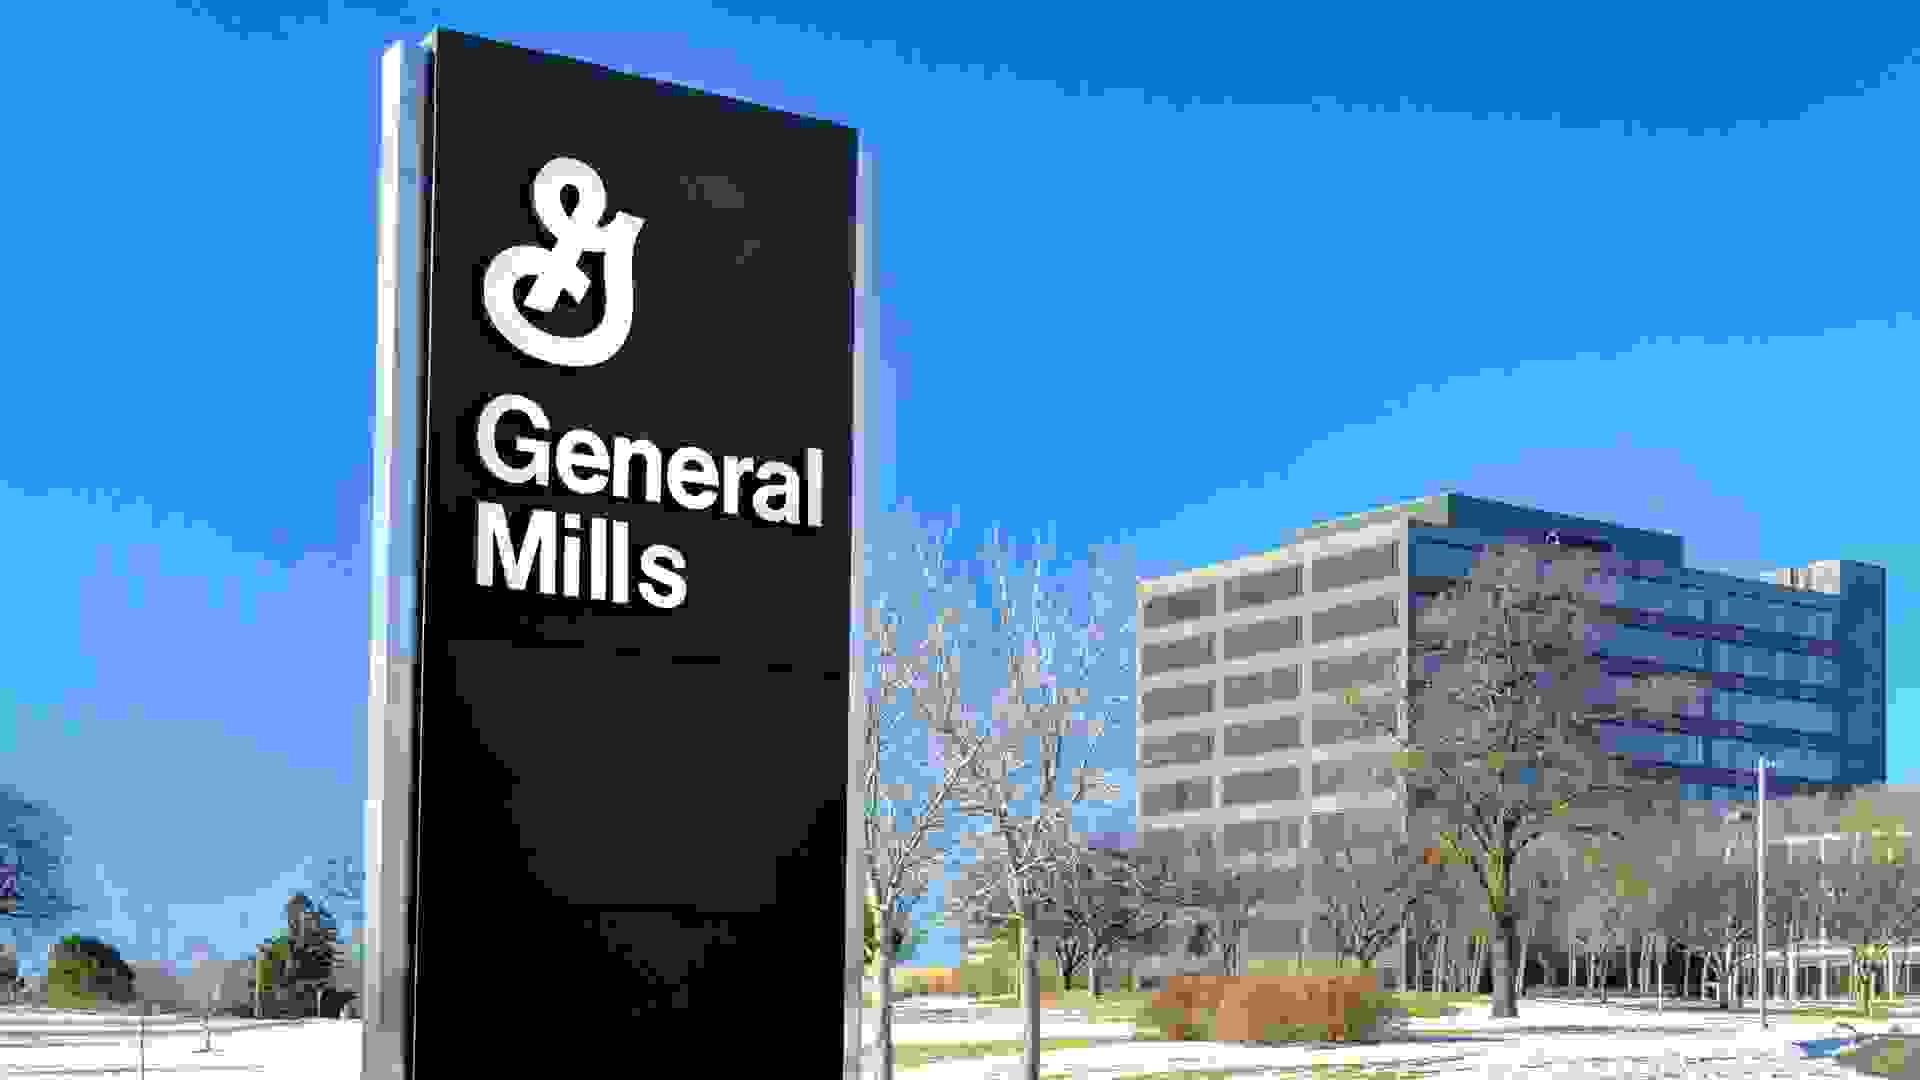 Golden Valley, USA - January 18, 2015: General Mills corporate headquarters and sign.